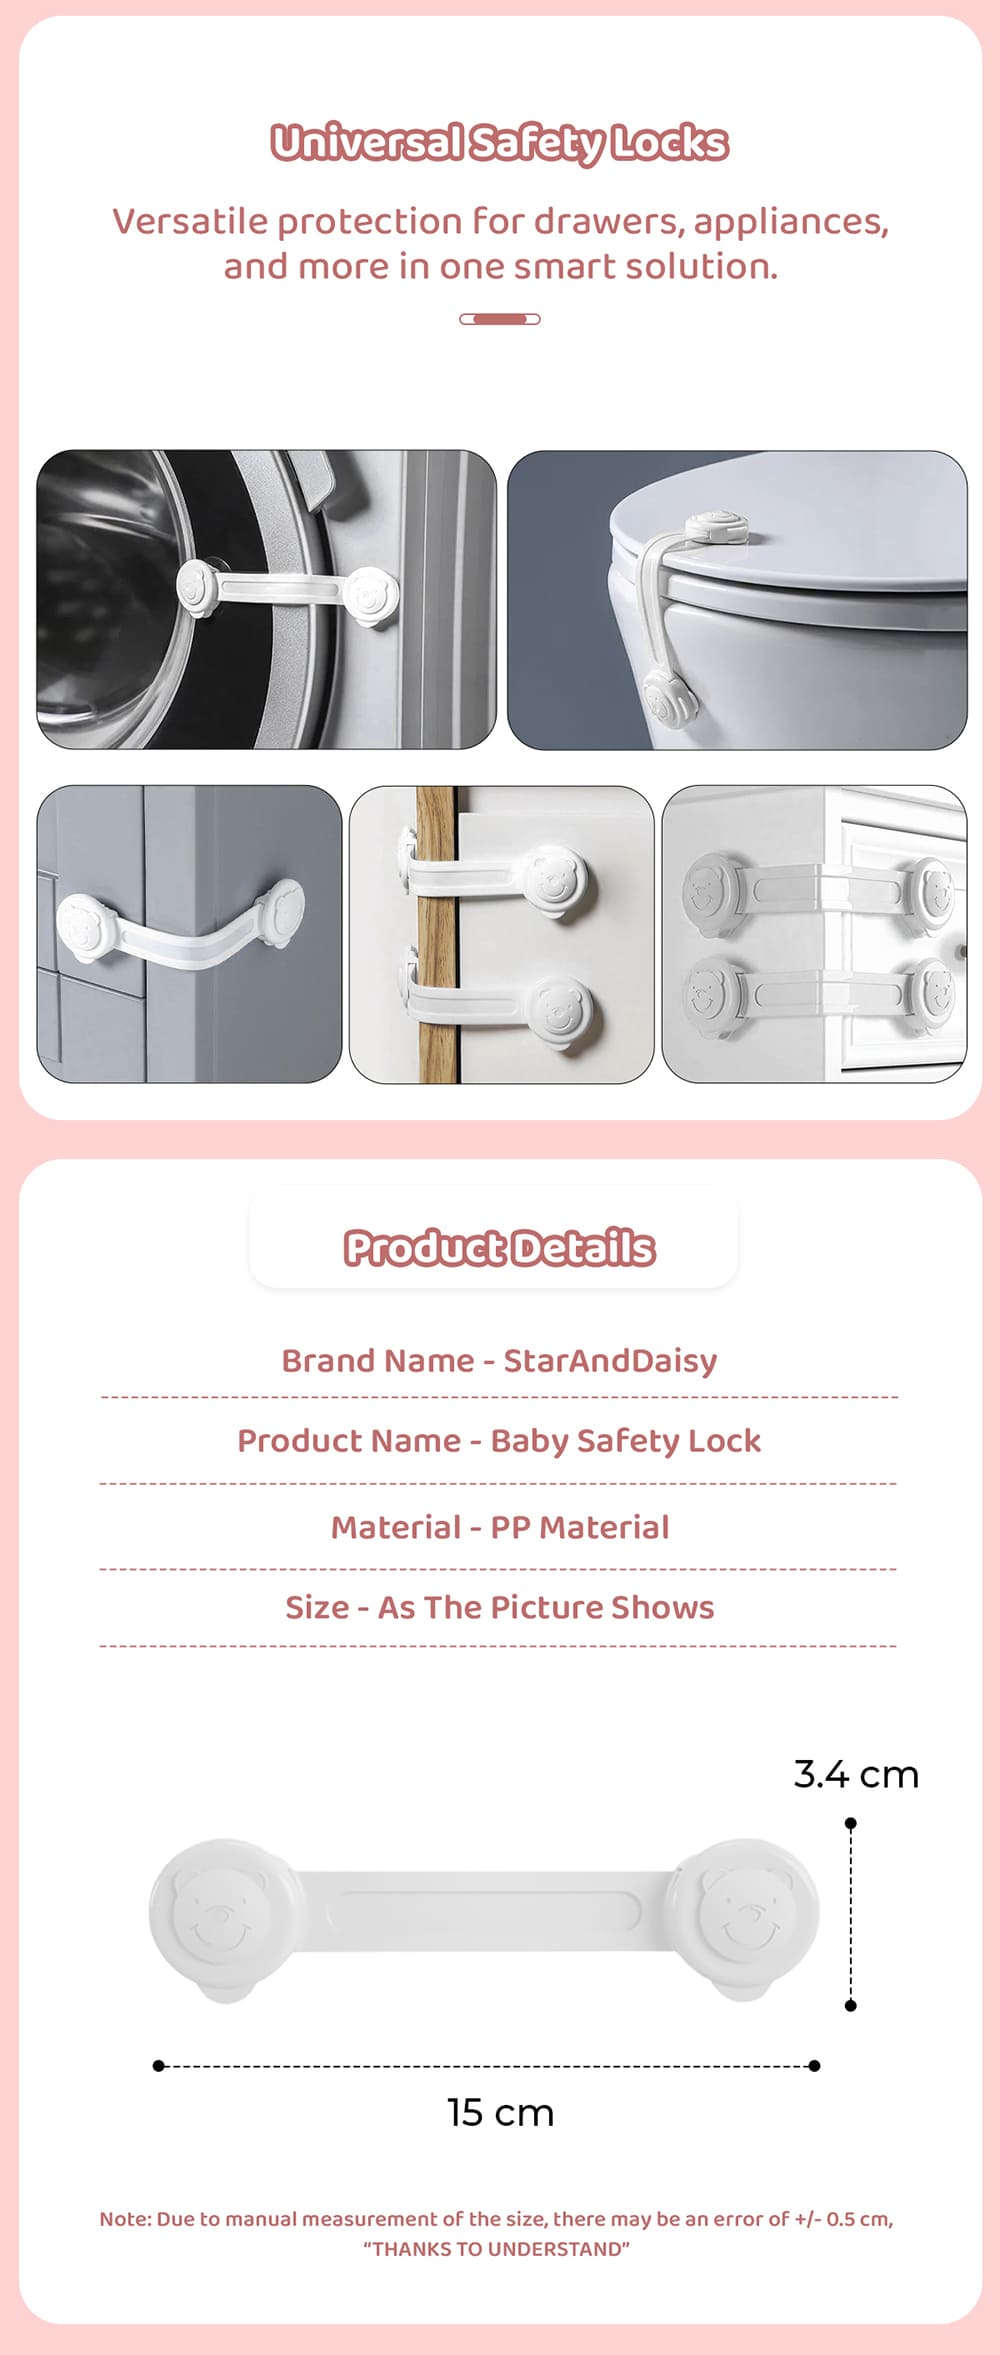 Specification of Small Safety Door Lock Straps for Baby